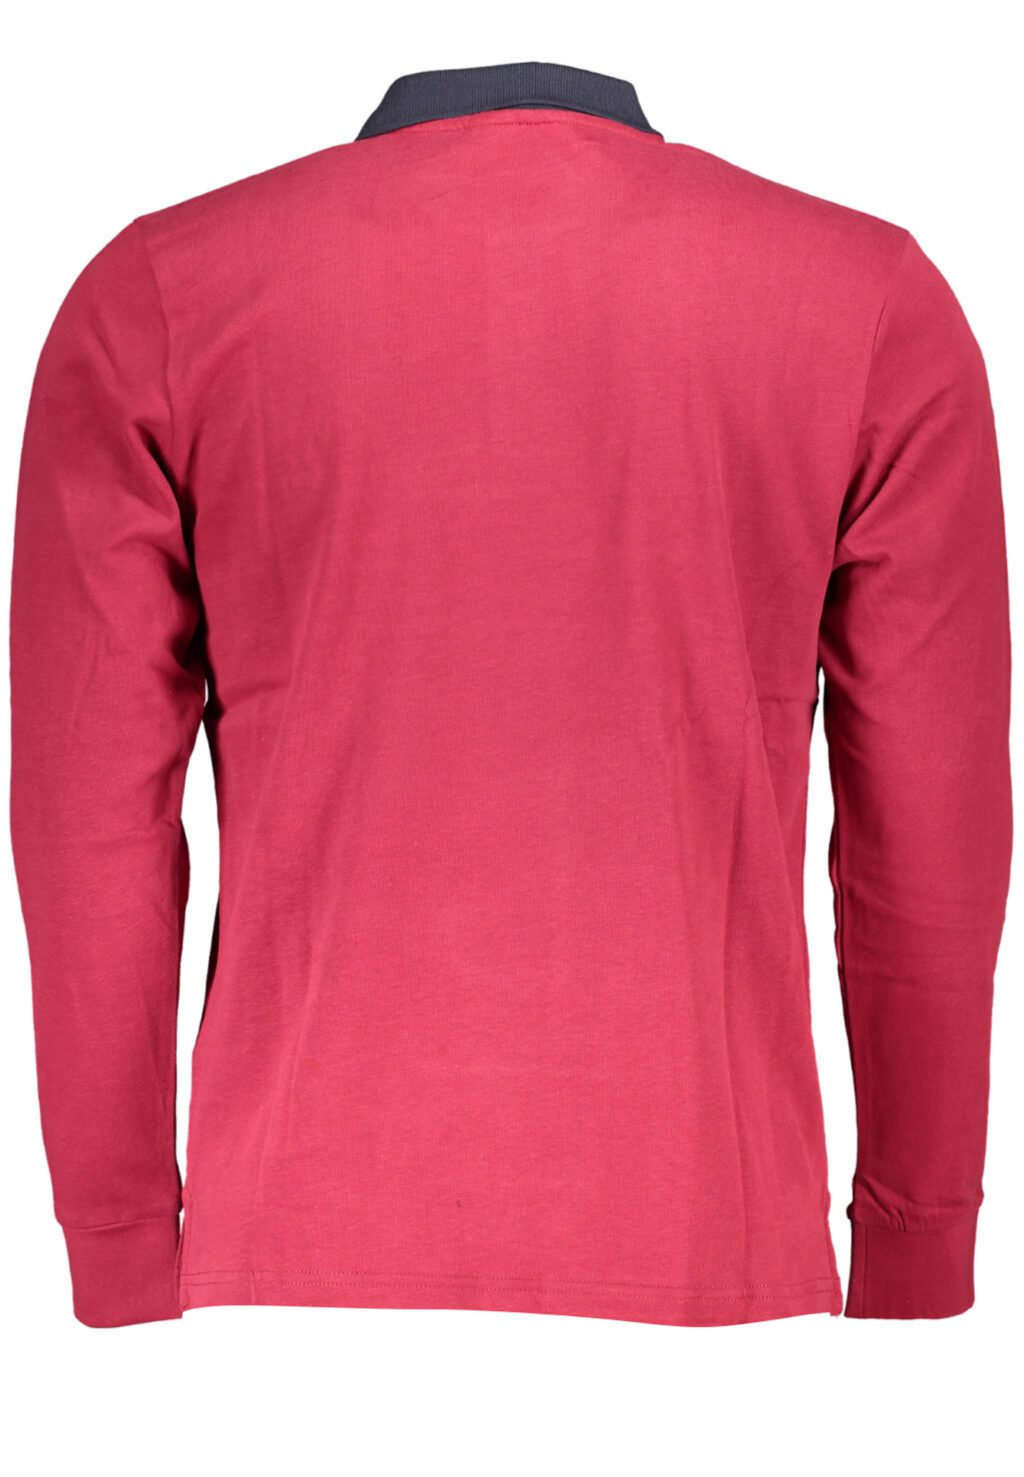 US GRAND POLO MEN'S LONG SLEEVED POLO SHIRT RED USP878_ROROSSO